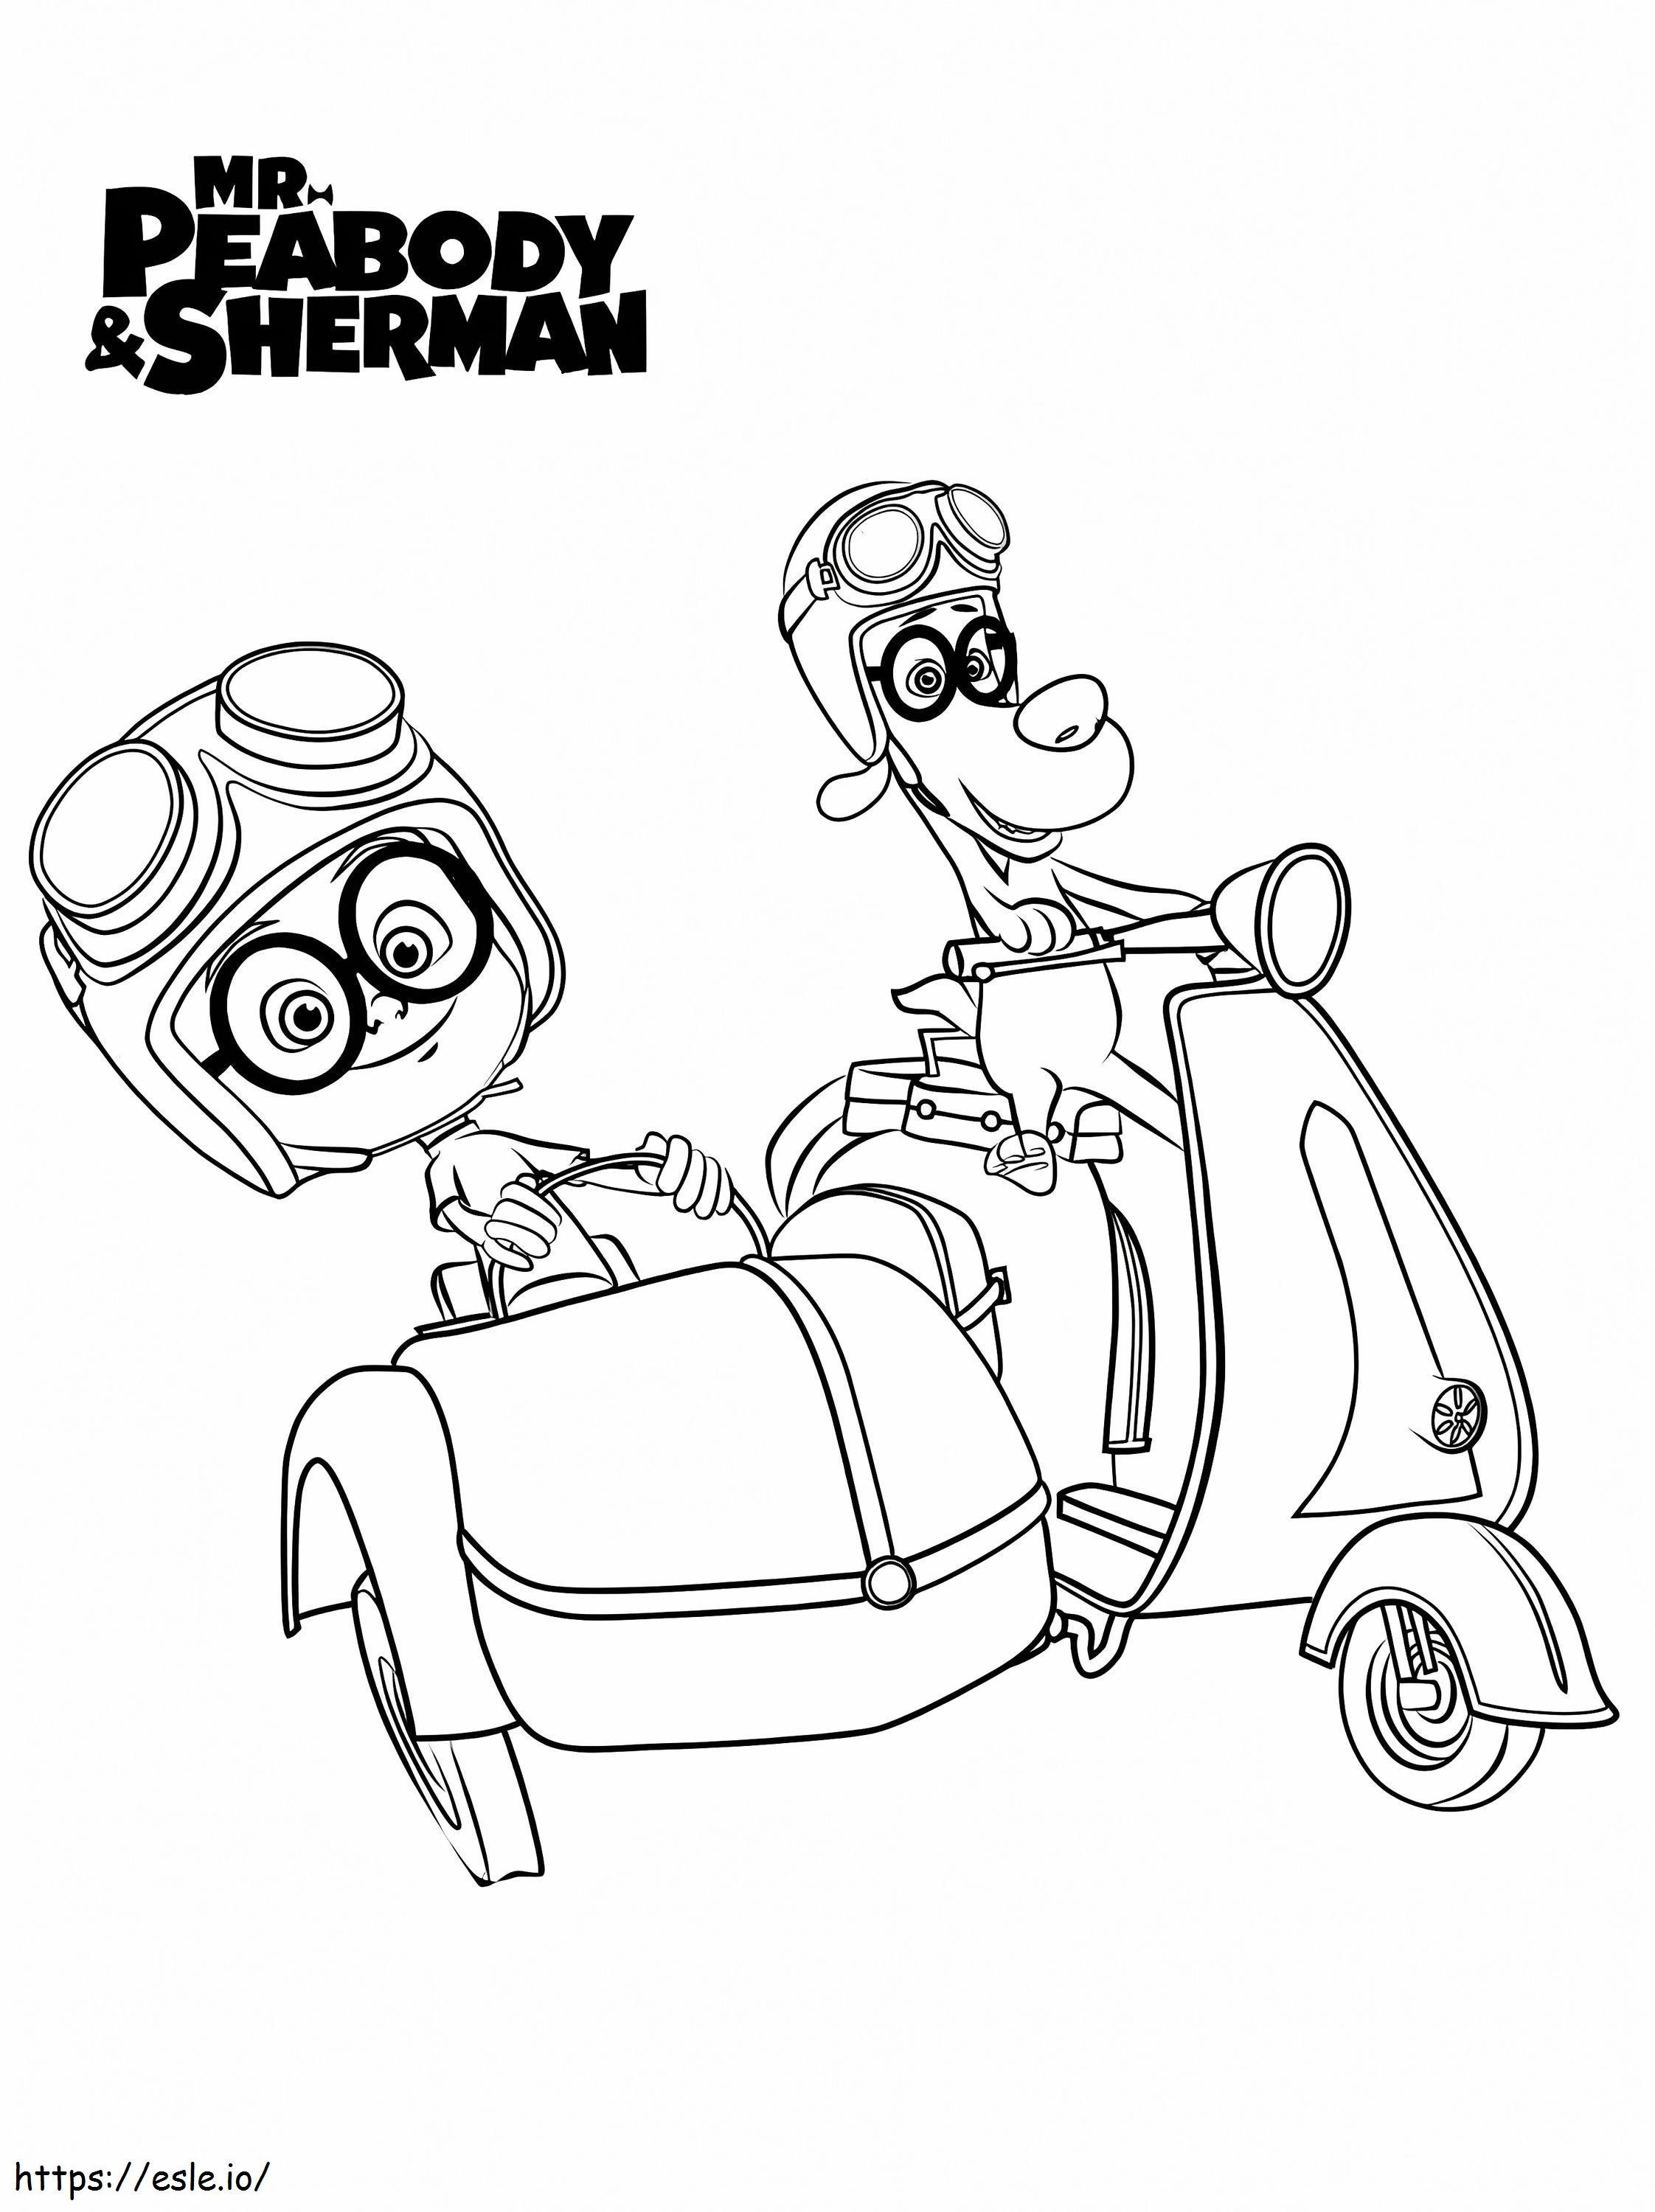 Mr. Peabody And Sherman 6 coloring page